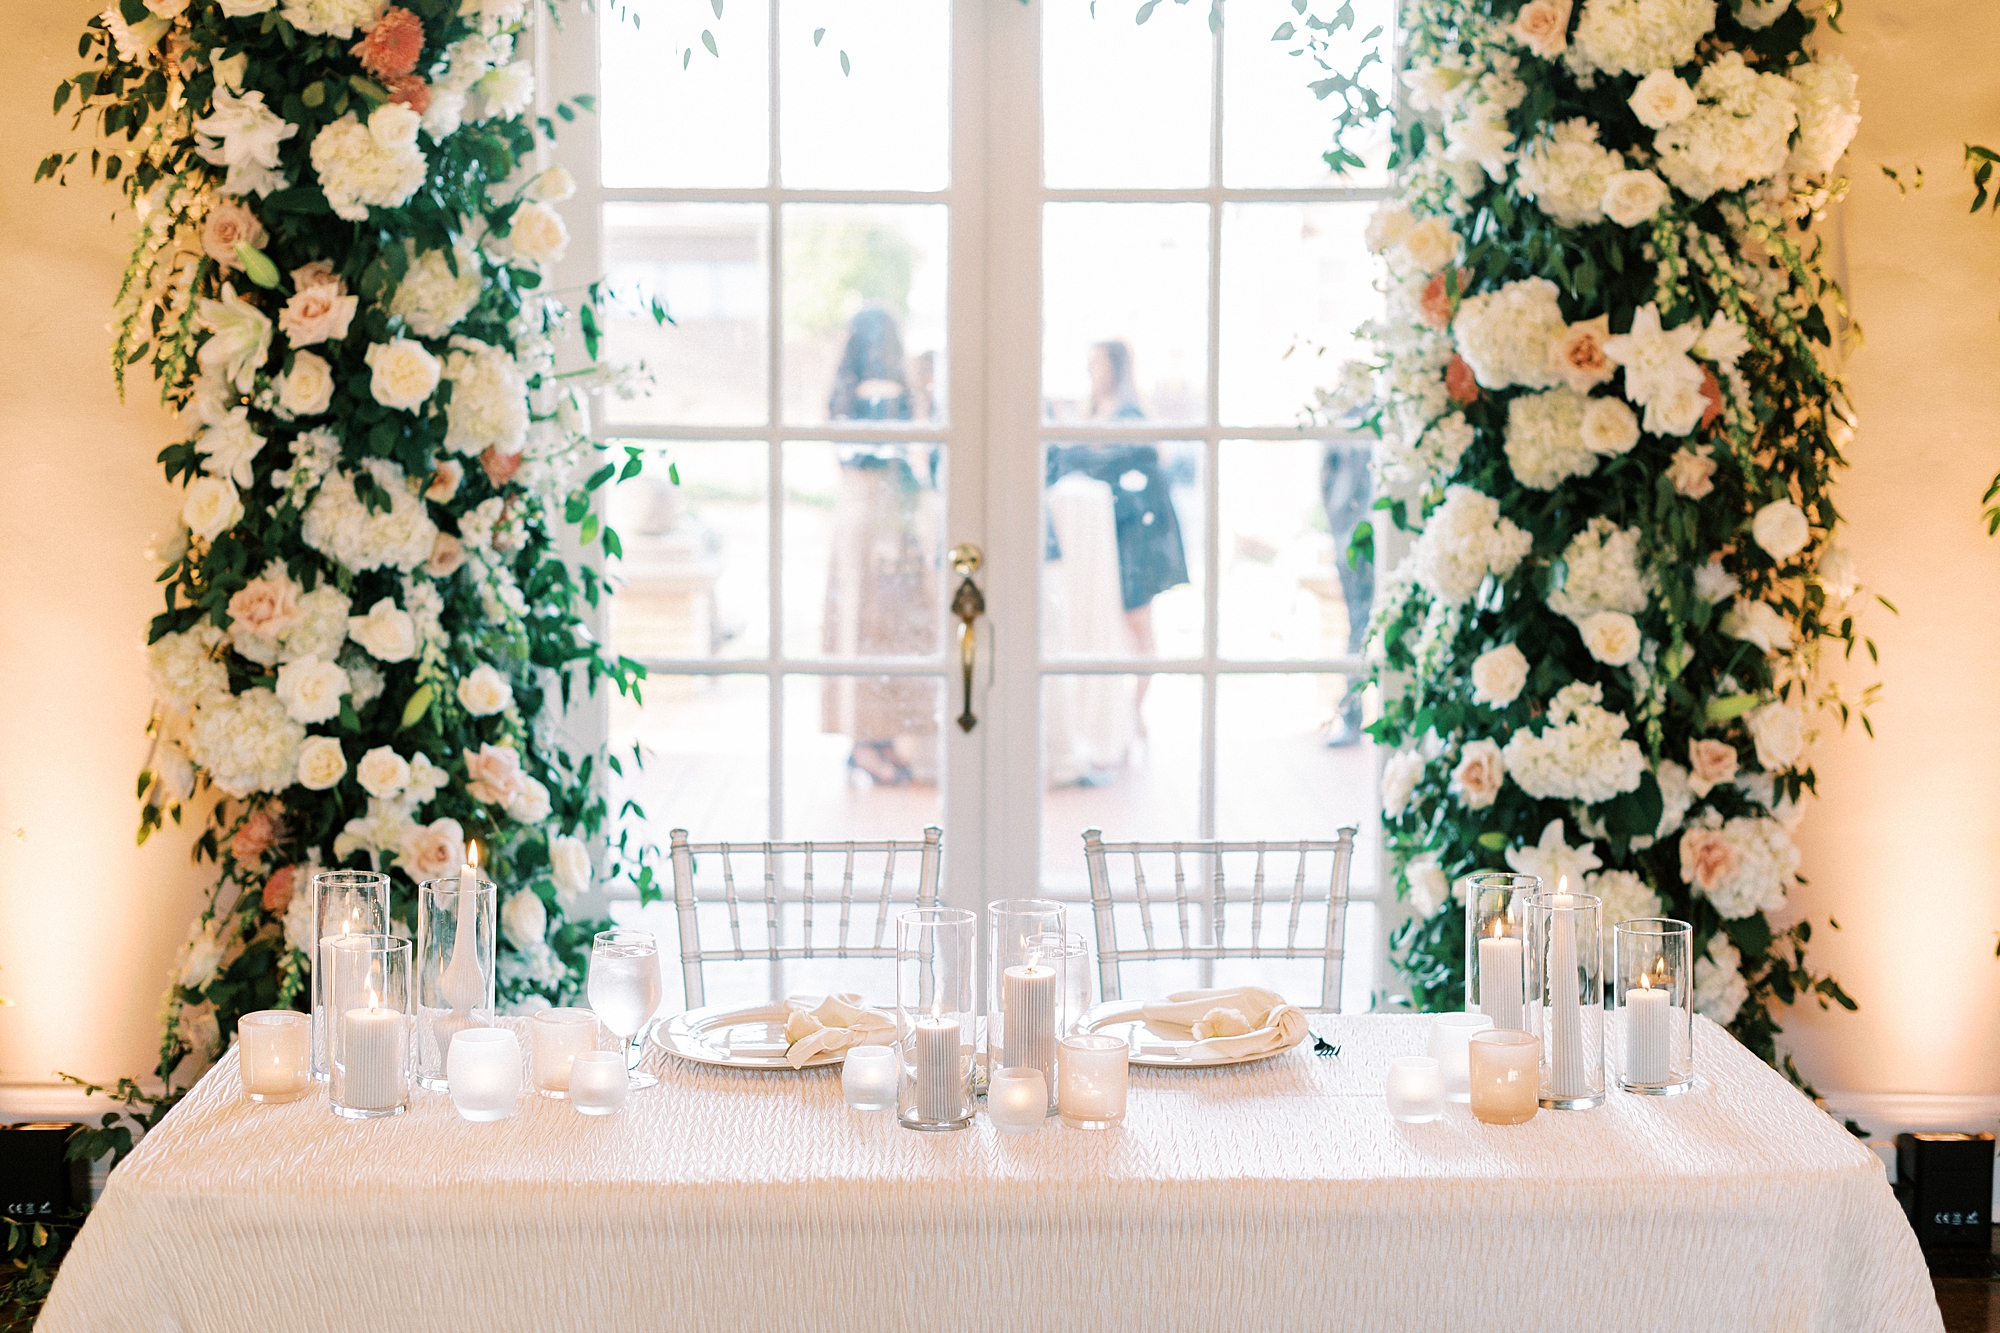 sweetheart table under floral arbor by windows at Separk Mansion